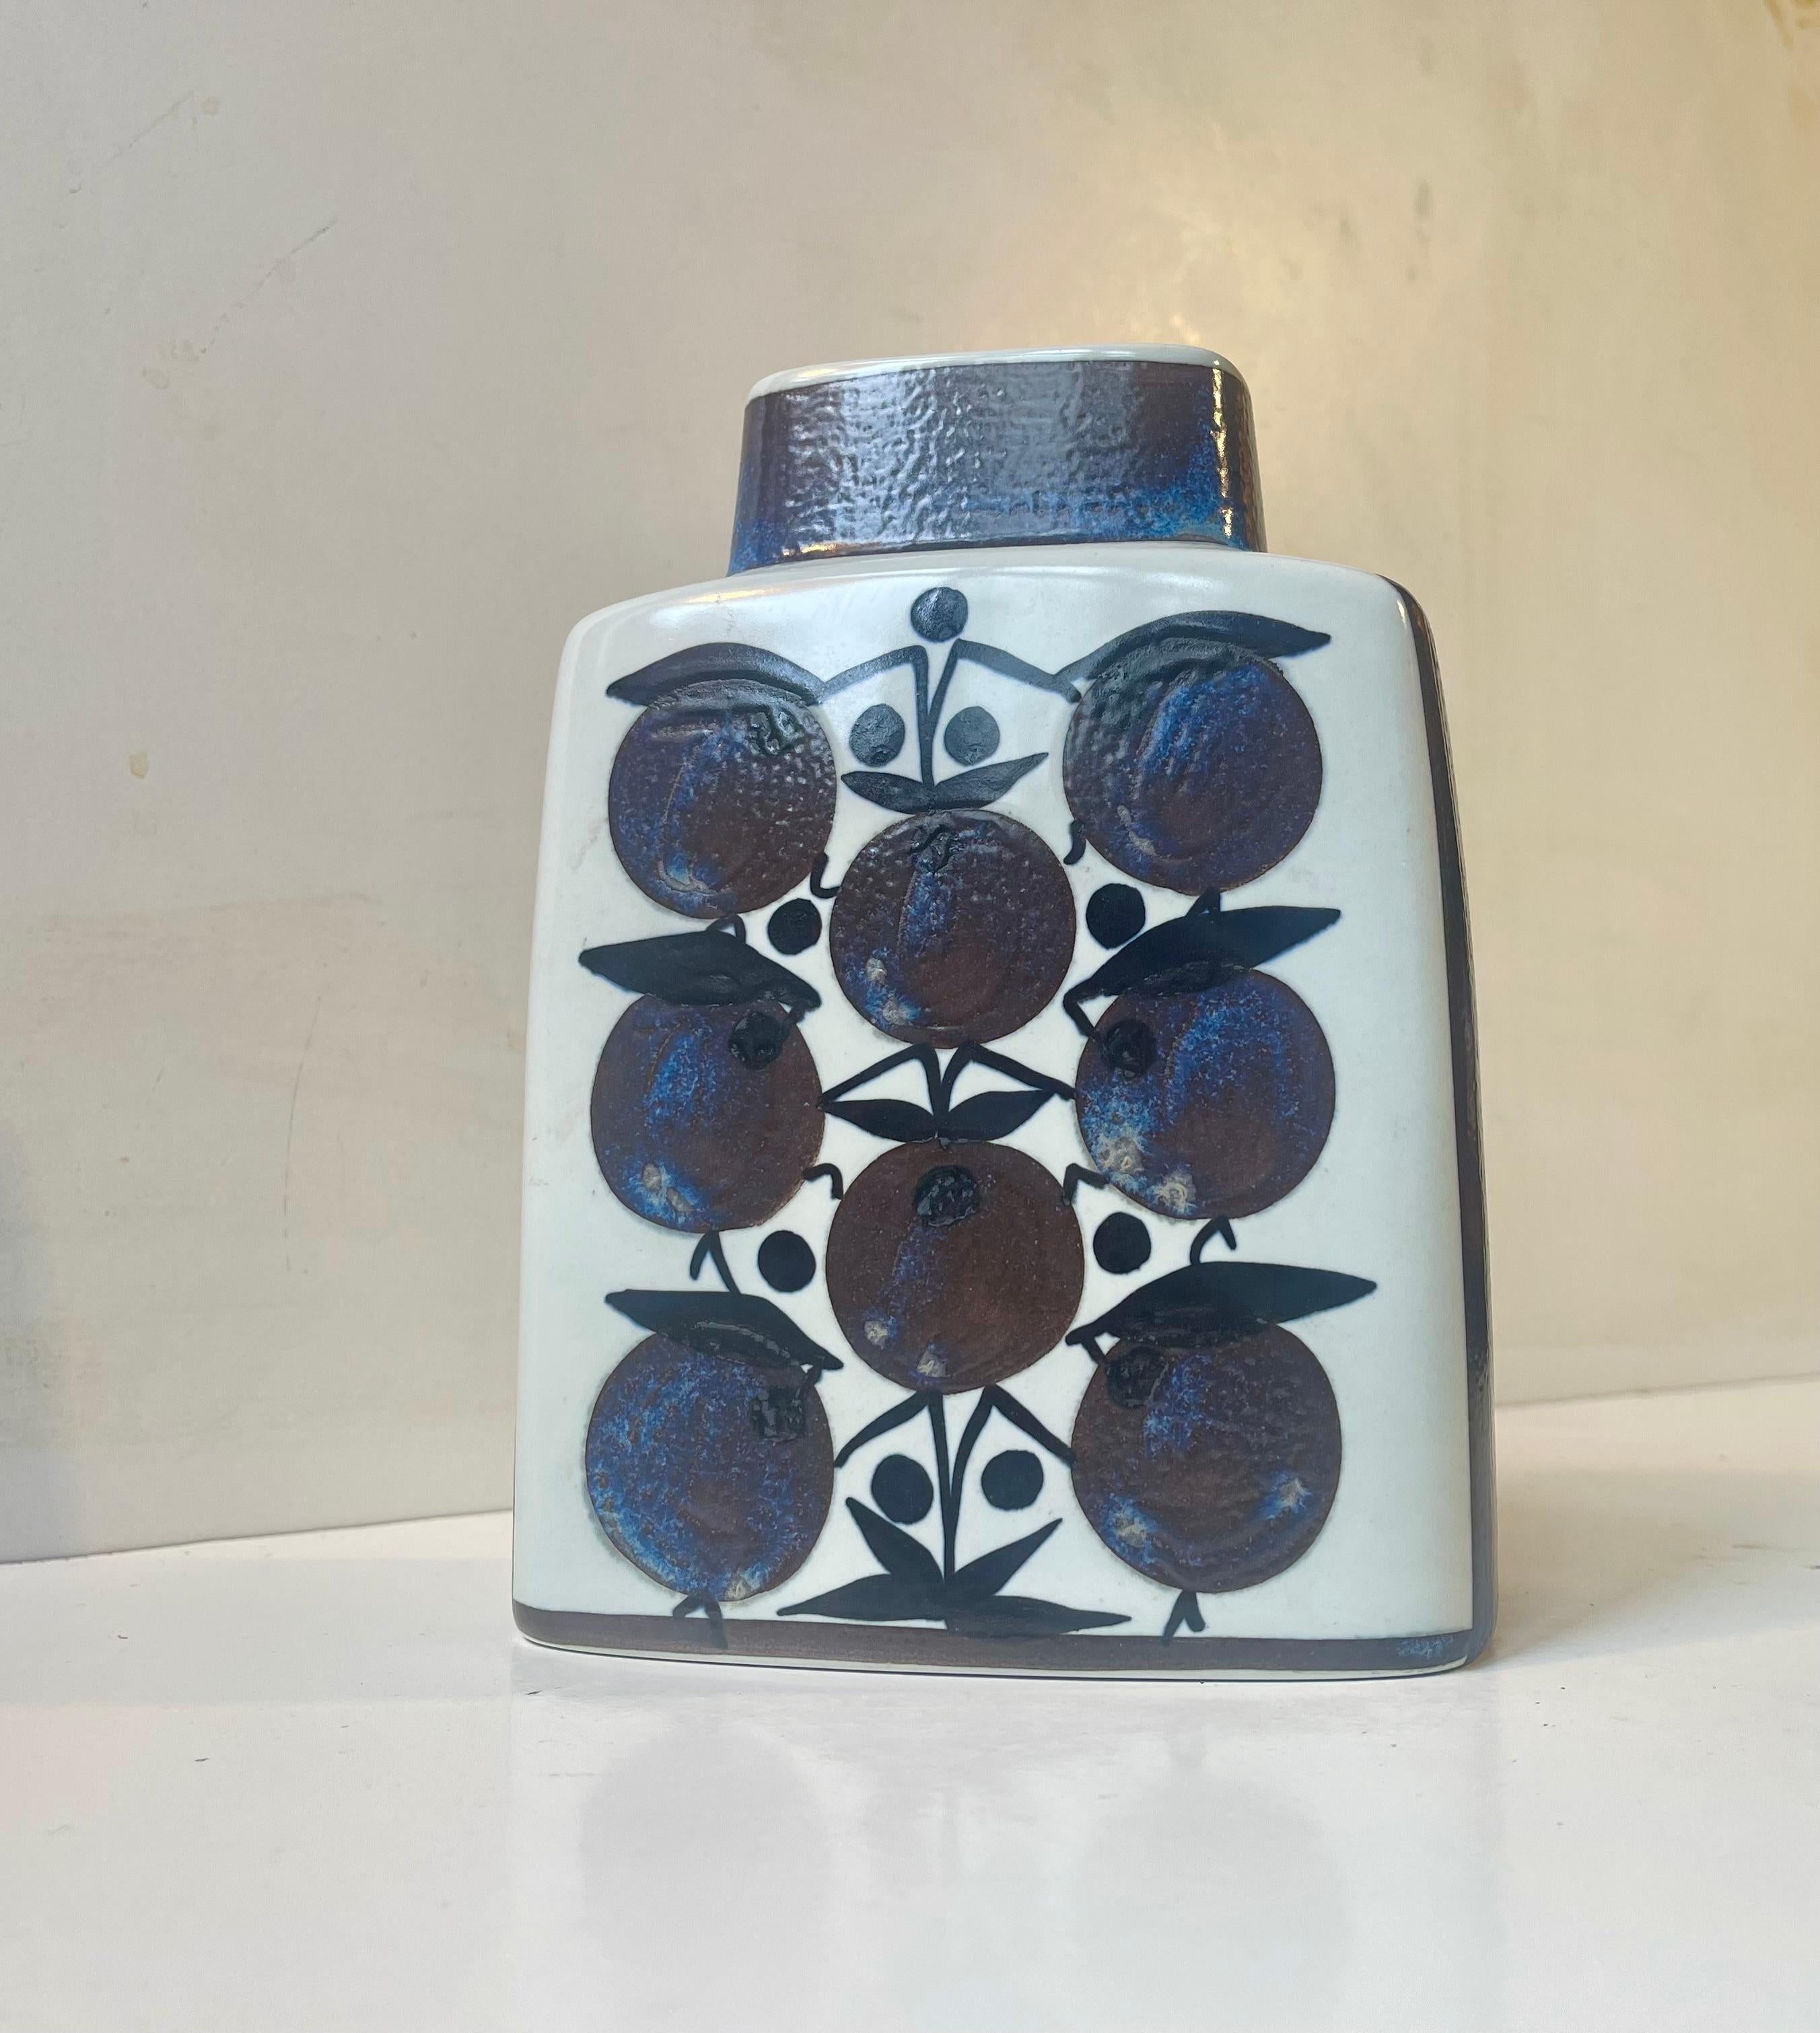 Royal Copenhagen Faience vase designed by Grethe Helland. Decorated with blue and purple glaze with blueberries as the main motif to both sides. Model number 441/3121 is also called Tenera and its fully marked to the base with designer initials and